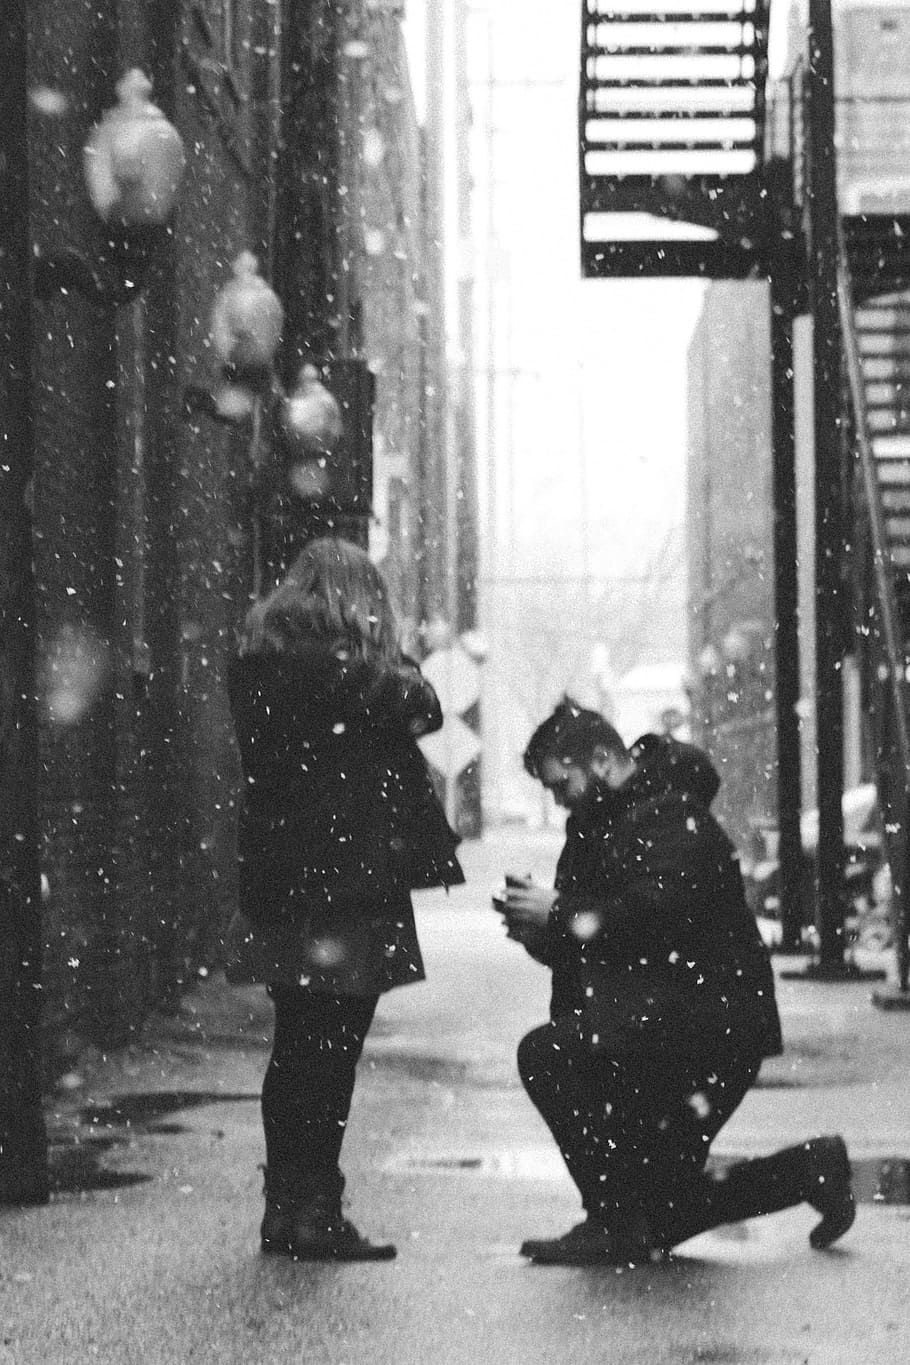 man, kneeling, front, woman, black and white, people, couple, propose, love, snow